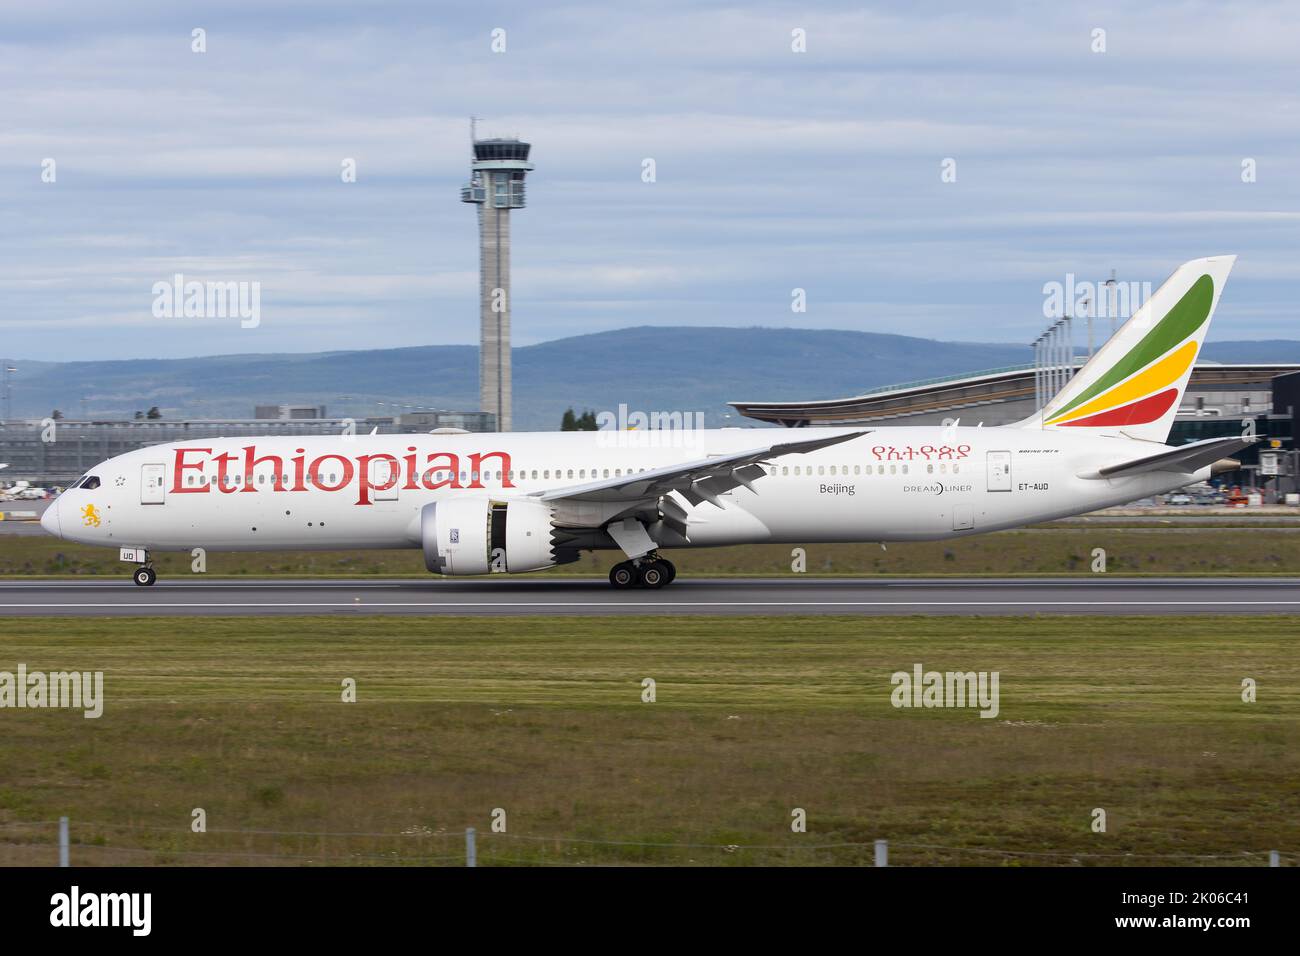 An Ethiopian Airlines Boeing 787-9 Dreamliner aircraft landing in Oslo in Norway Stock Photo